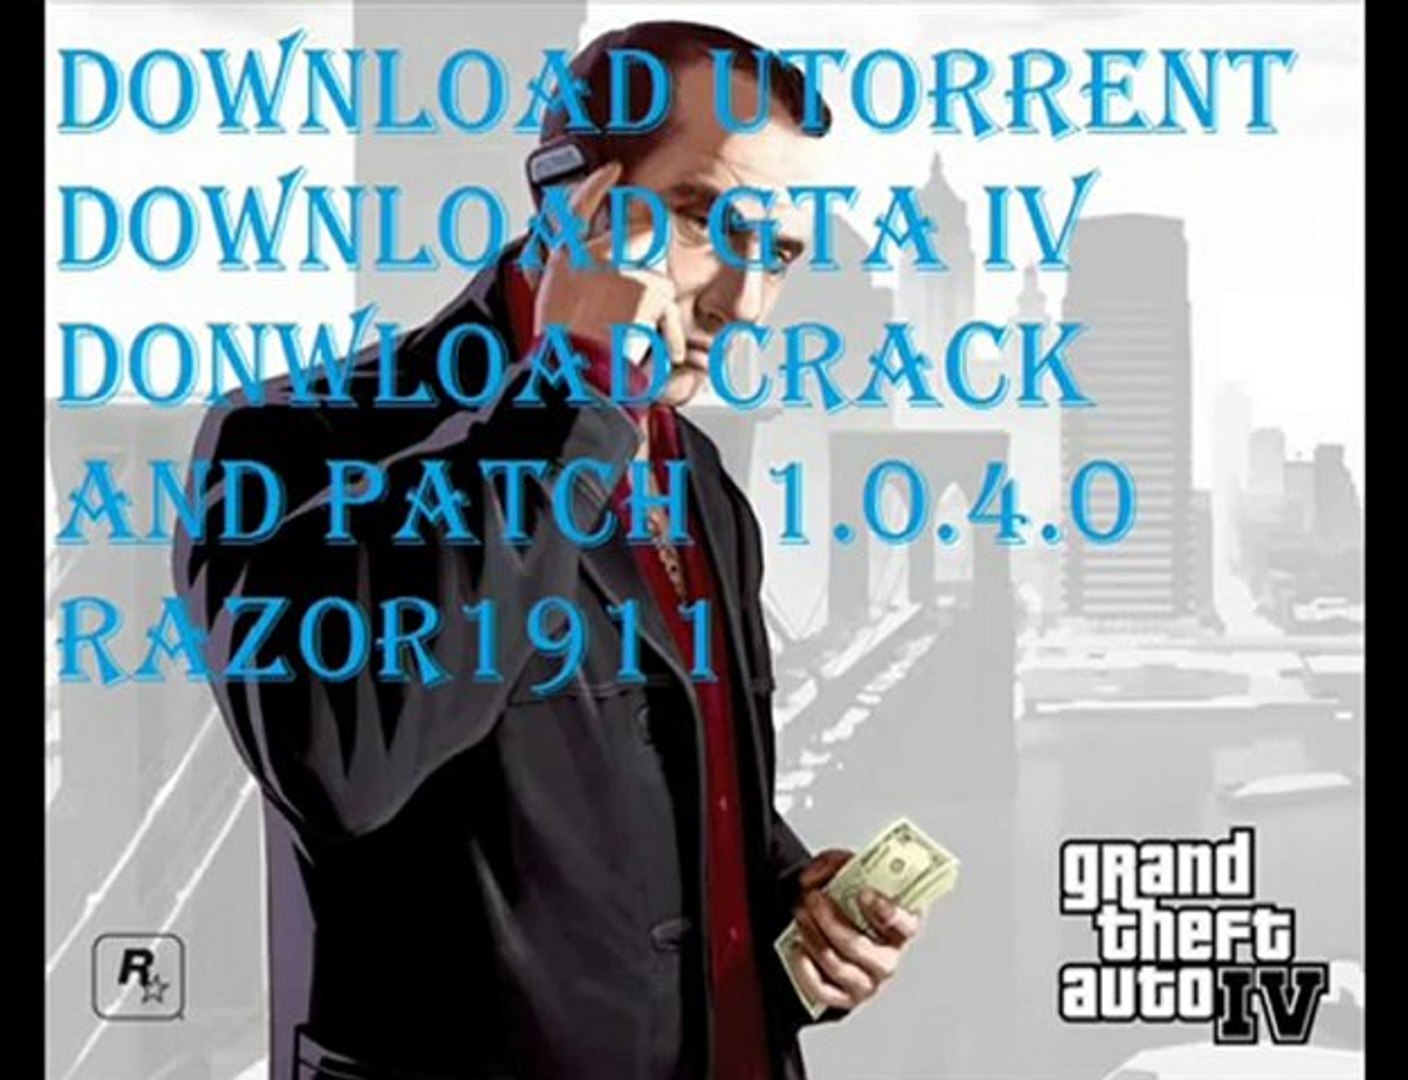 Grand theft auto IV torrent download and patch and ... - video Dailymotion